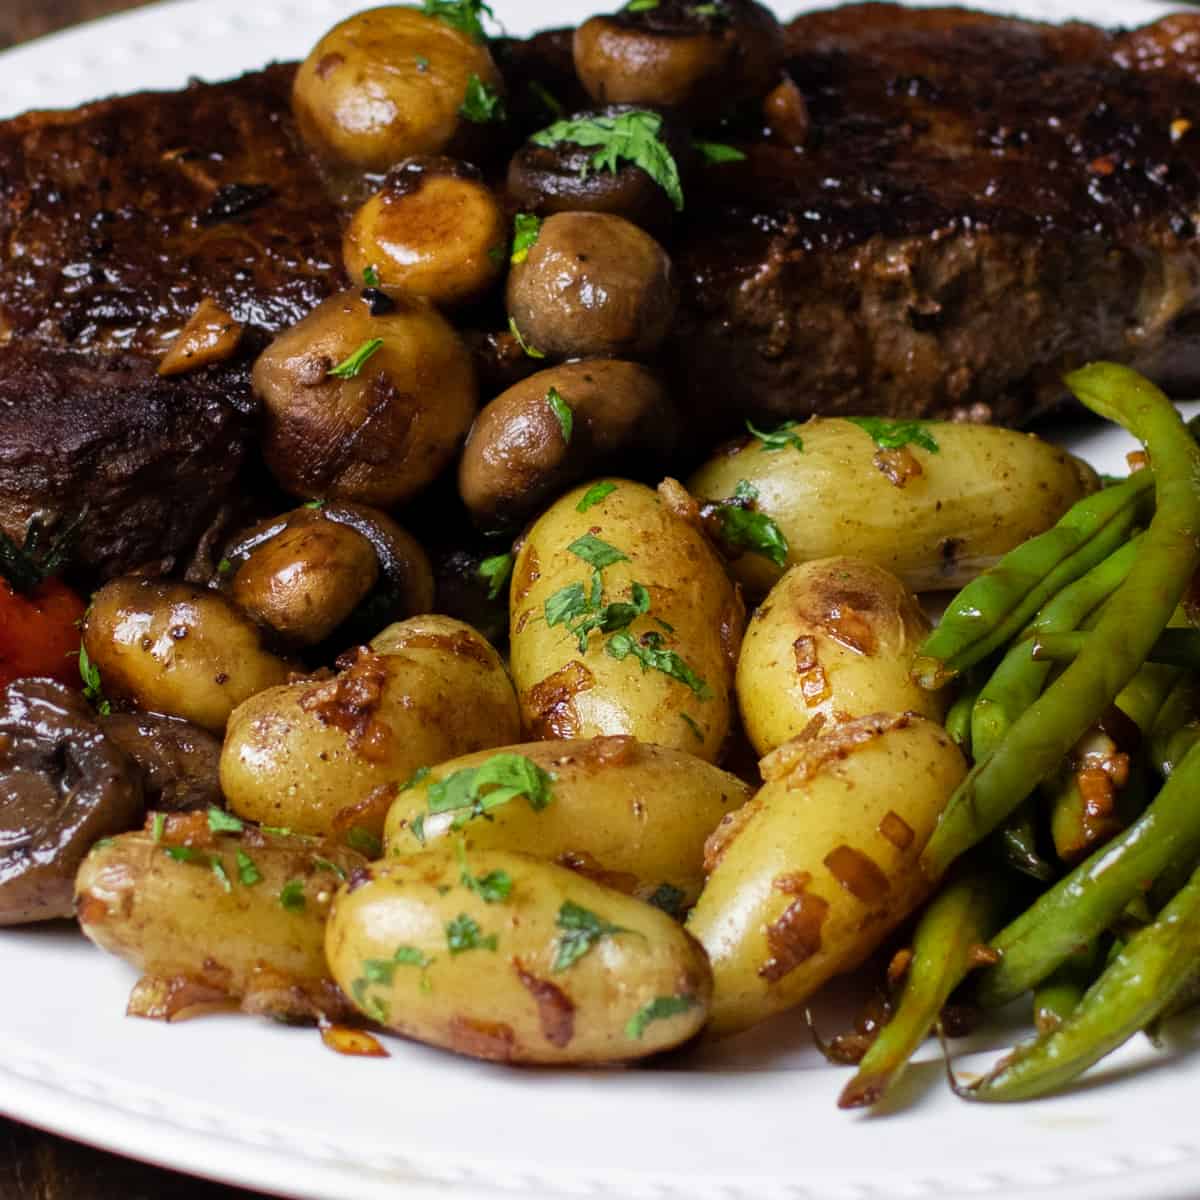 Fingerling potatoes on a plate with a steak, mushrooms and green beans.